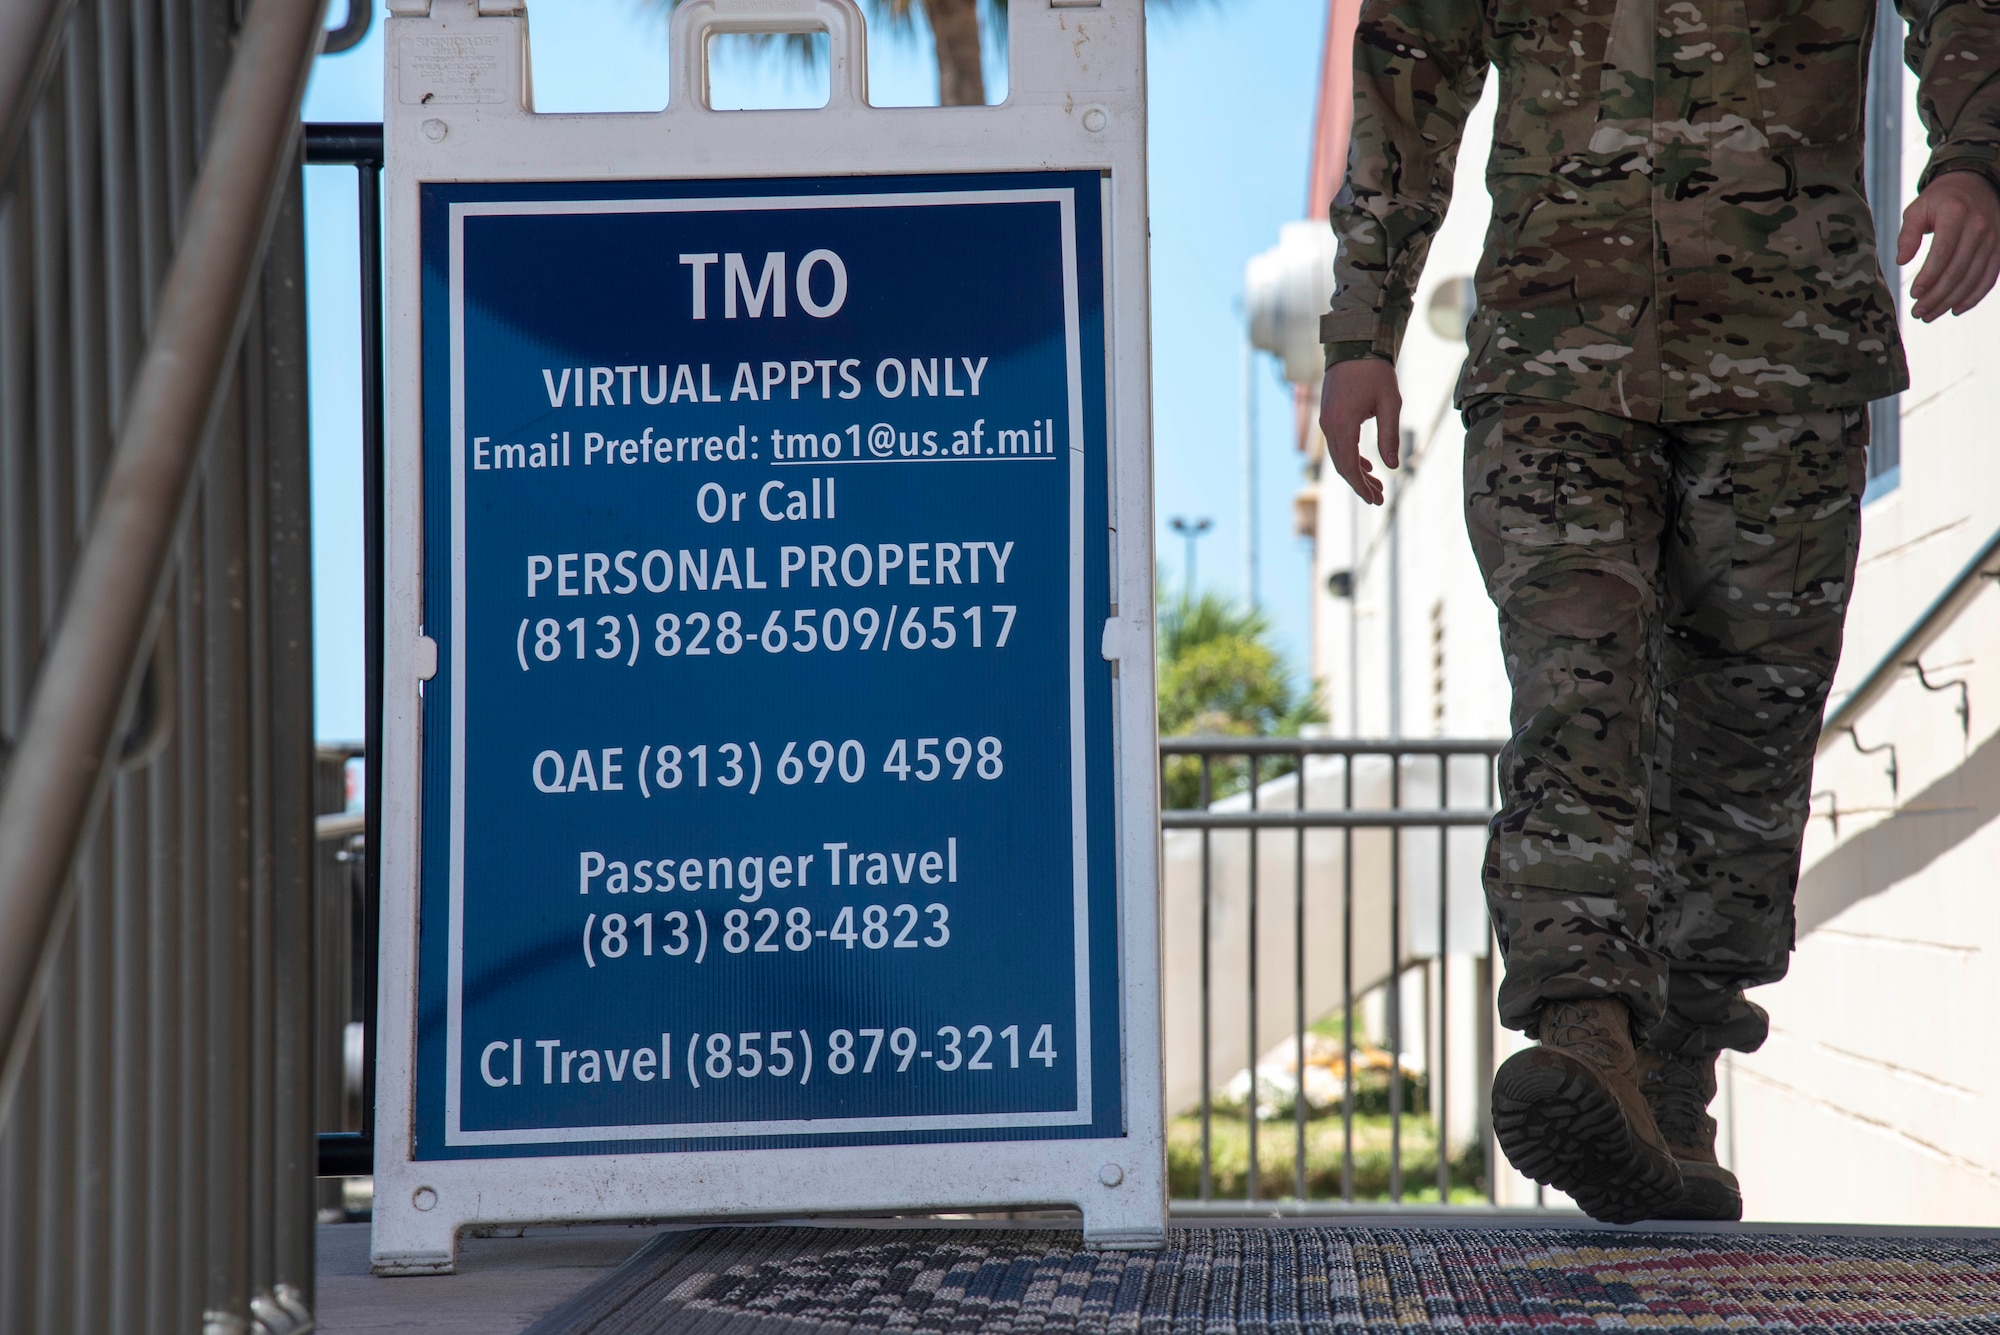 A U.S. Air Force Airman walks past a sign at the 6th Logistics Readiness Squadron Traffic Management Office (TMO) entrance at MacDill Air Force Base, Florida, May 26, 2021. Any military member who is retiring, separating or changing duty stations will work with TMO, specifically personal property and passenger travel, to get their personal belongings shipped to their next home.